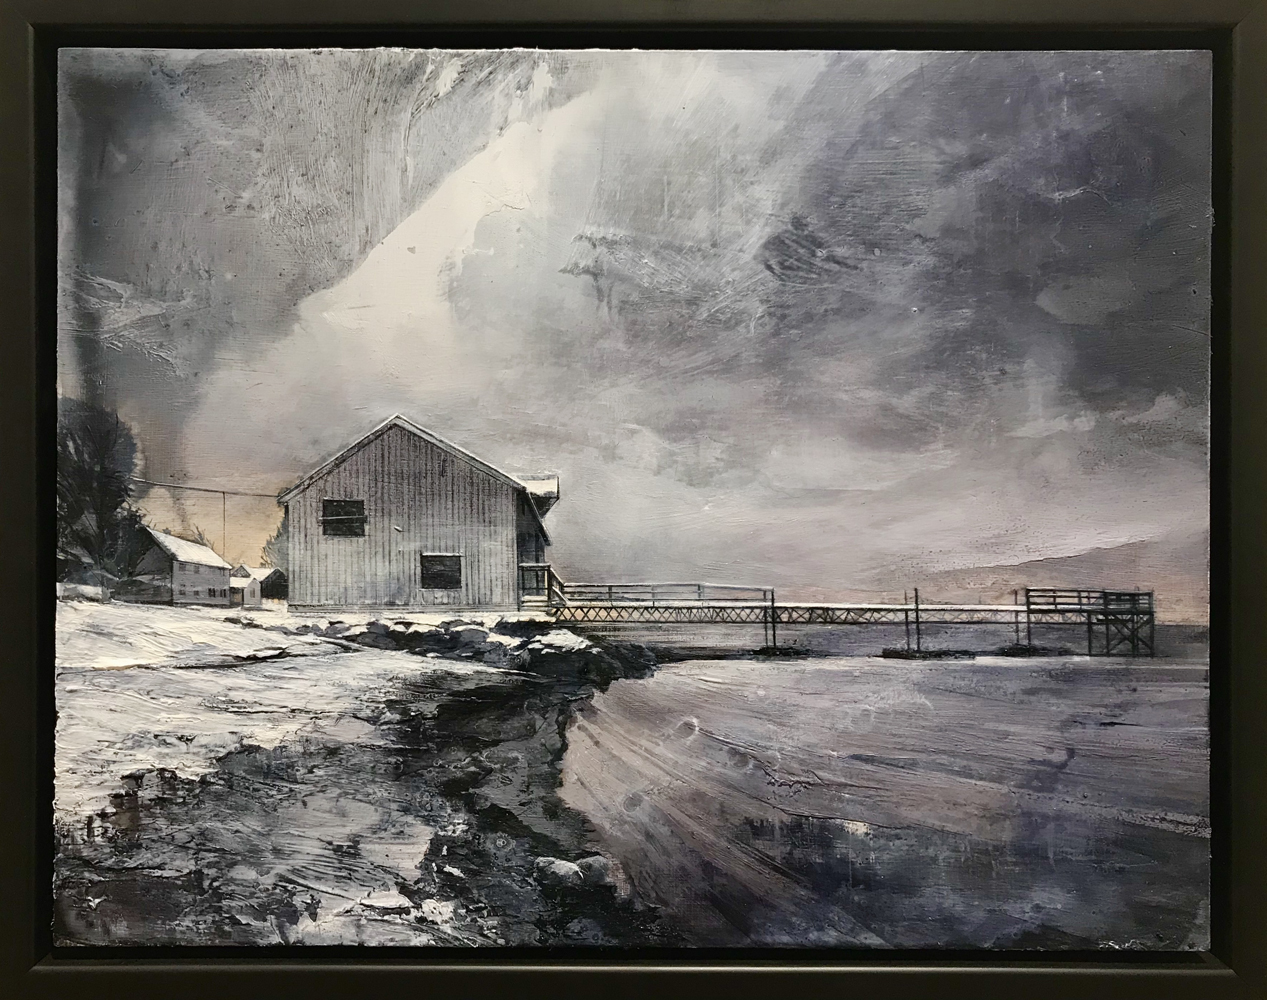 Mark Thompson, The End of Trying, 2020, oil on panel, 14 x 18 inches, framed, $2000.